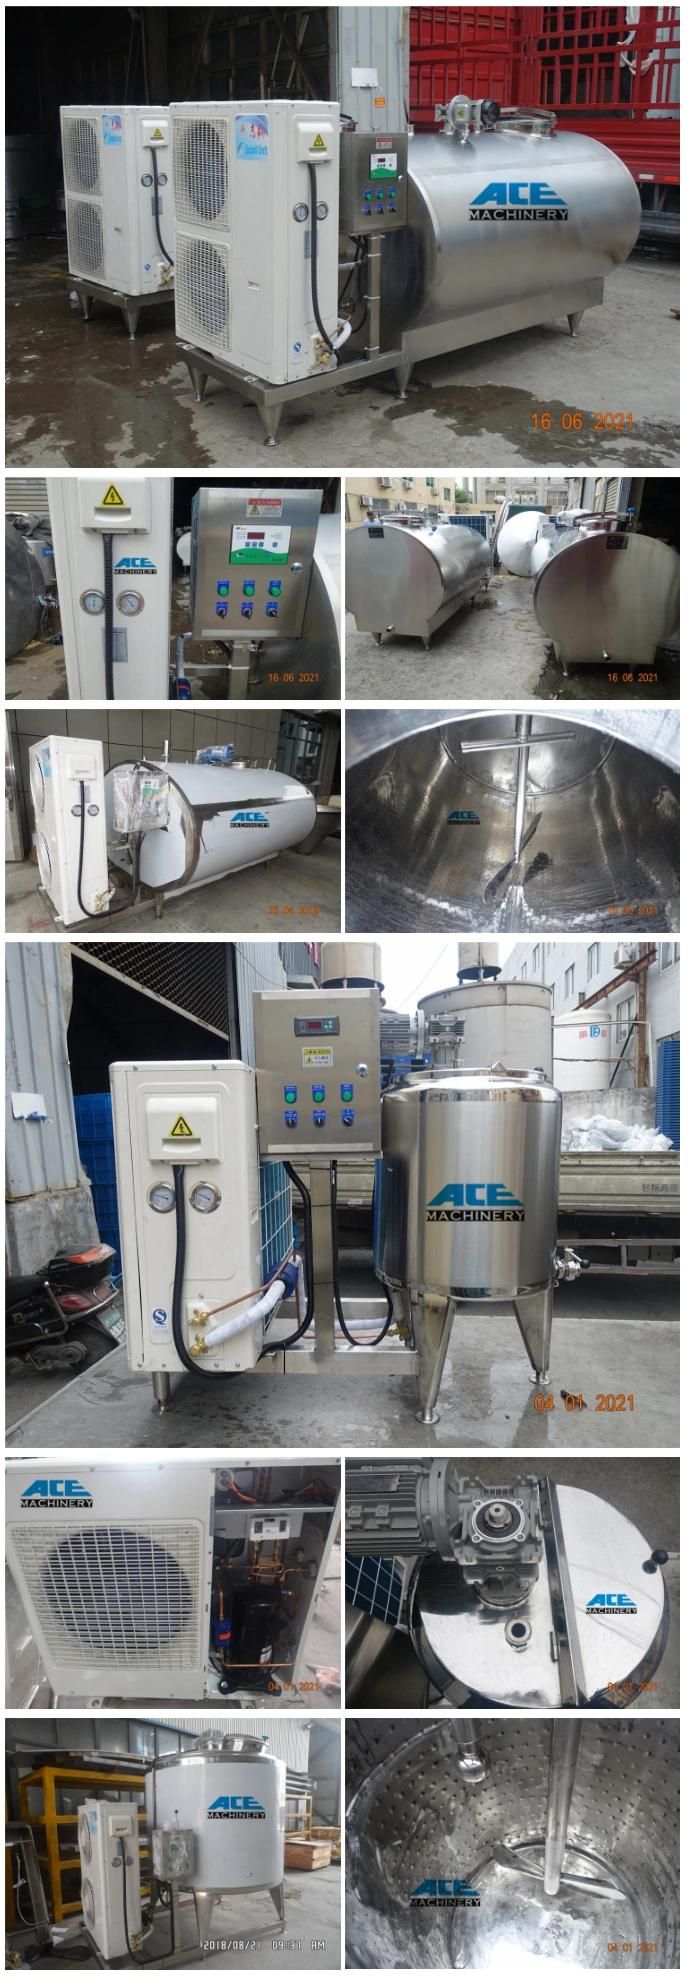 Price of New Technology Cooling Milk 50L Storage Tank for Long Storage of Fresh Milk